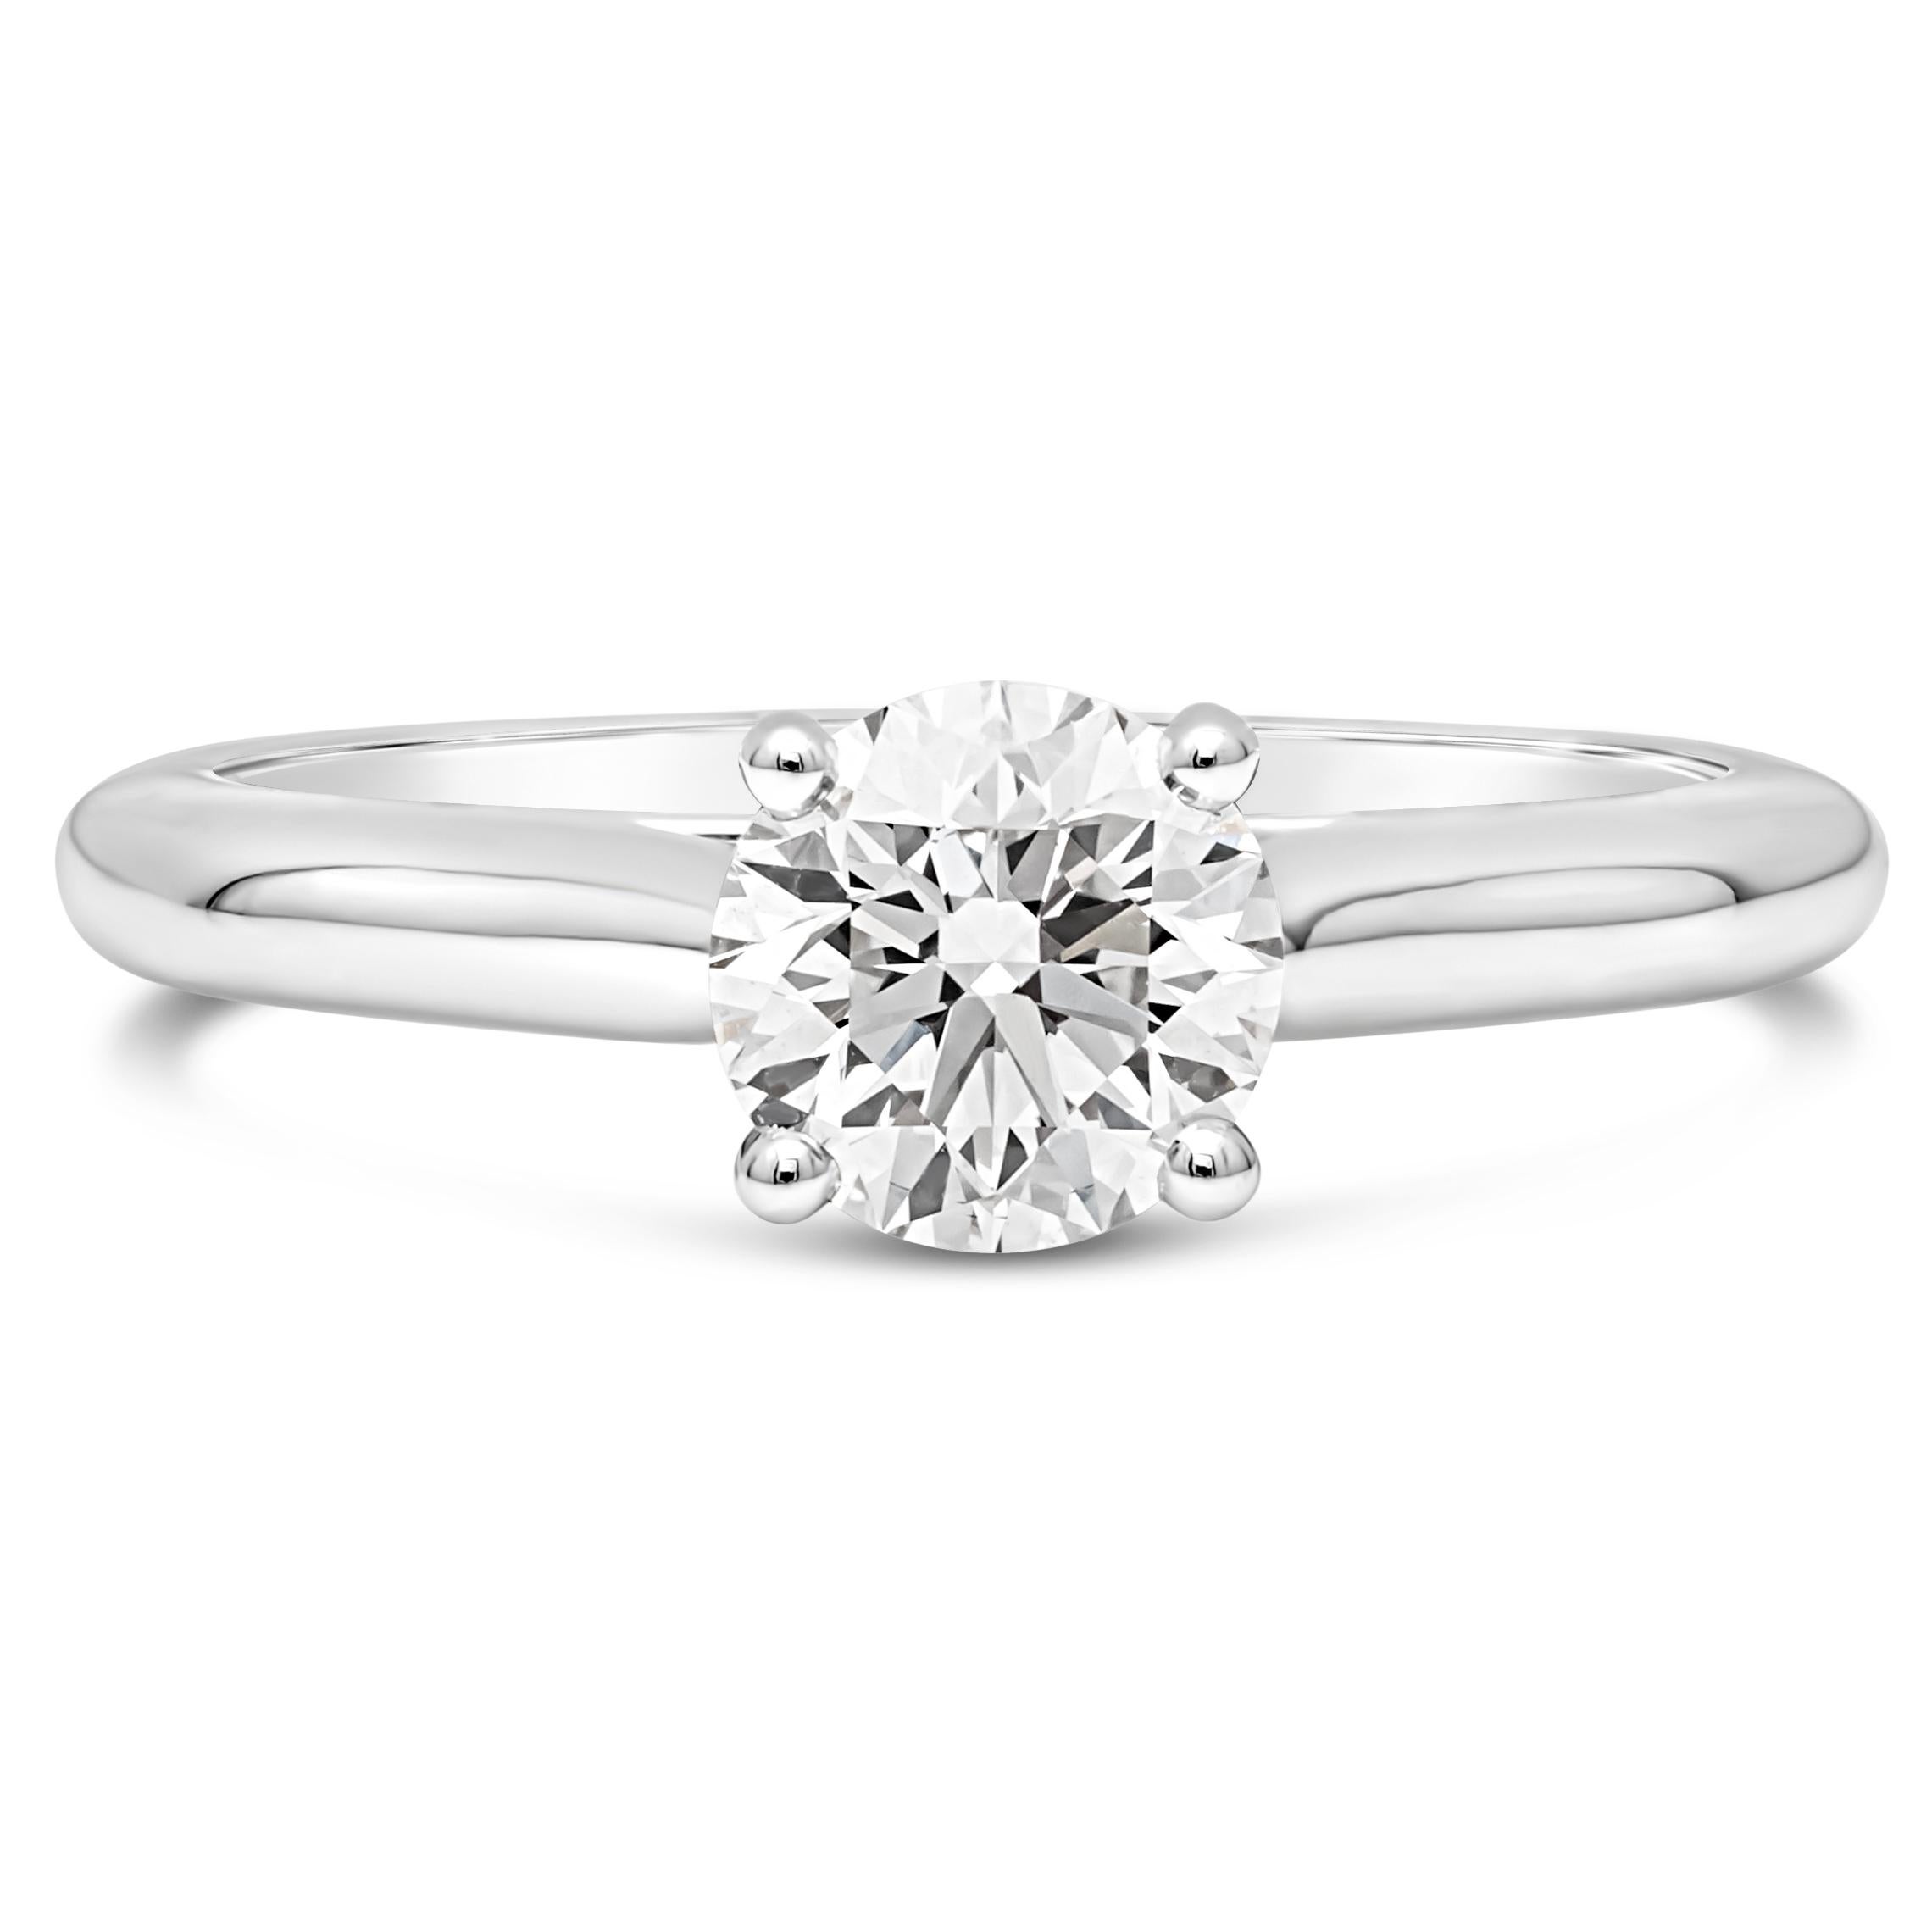 A classic and timeless engagement ring style made and Signed by Cartier at 1895 showcasing a 0.90 carats round brilliant diamond, set in a traditional solitaire four prong basket setting. Accompanied with a GIA report certifying the center diamond